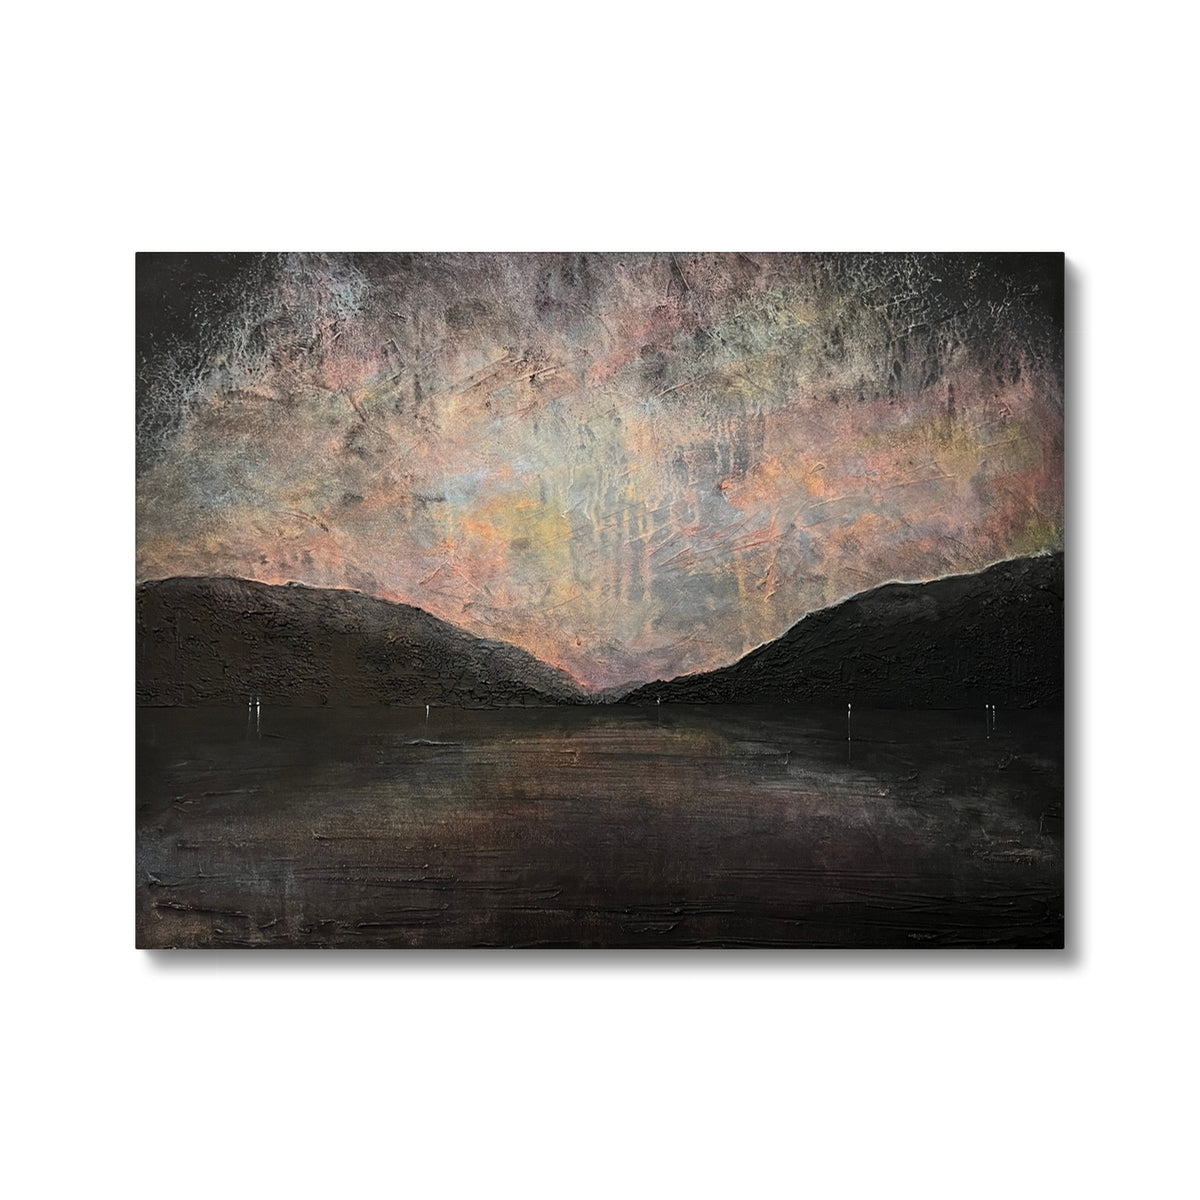 A Brooding Loch Lomond Painting | Canvas From Scotland-Contemporary Stretched Canvas Prints-Scottish Lochs & Mountains Art Gallery-24"x18"-Paintings, Prints, Homeware, Art Gifts From Scotland By Scottish Artist Kevin Hunter